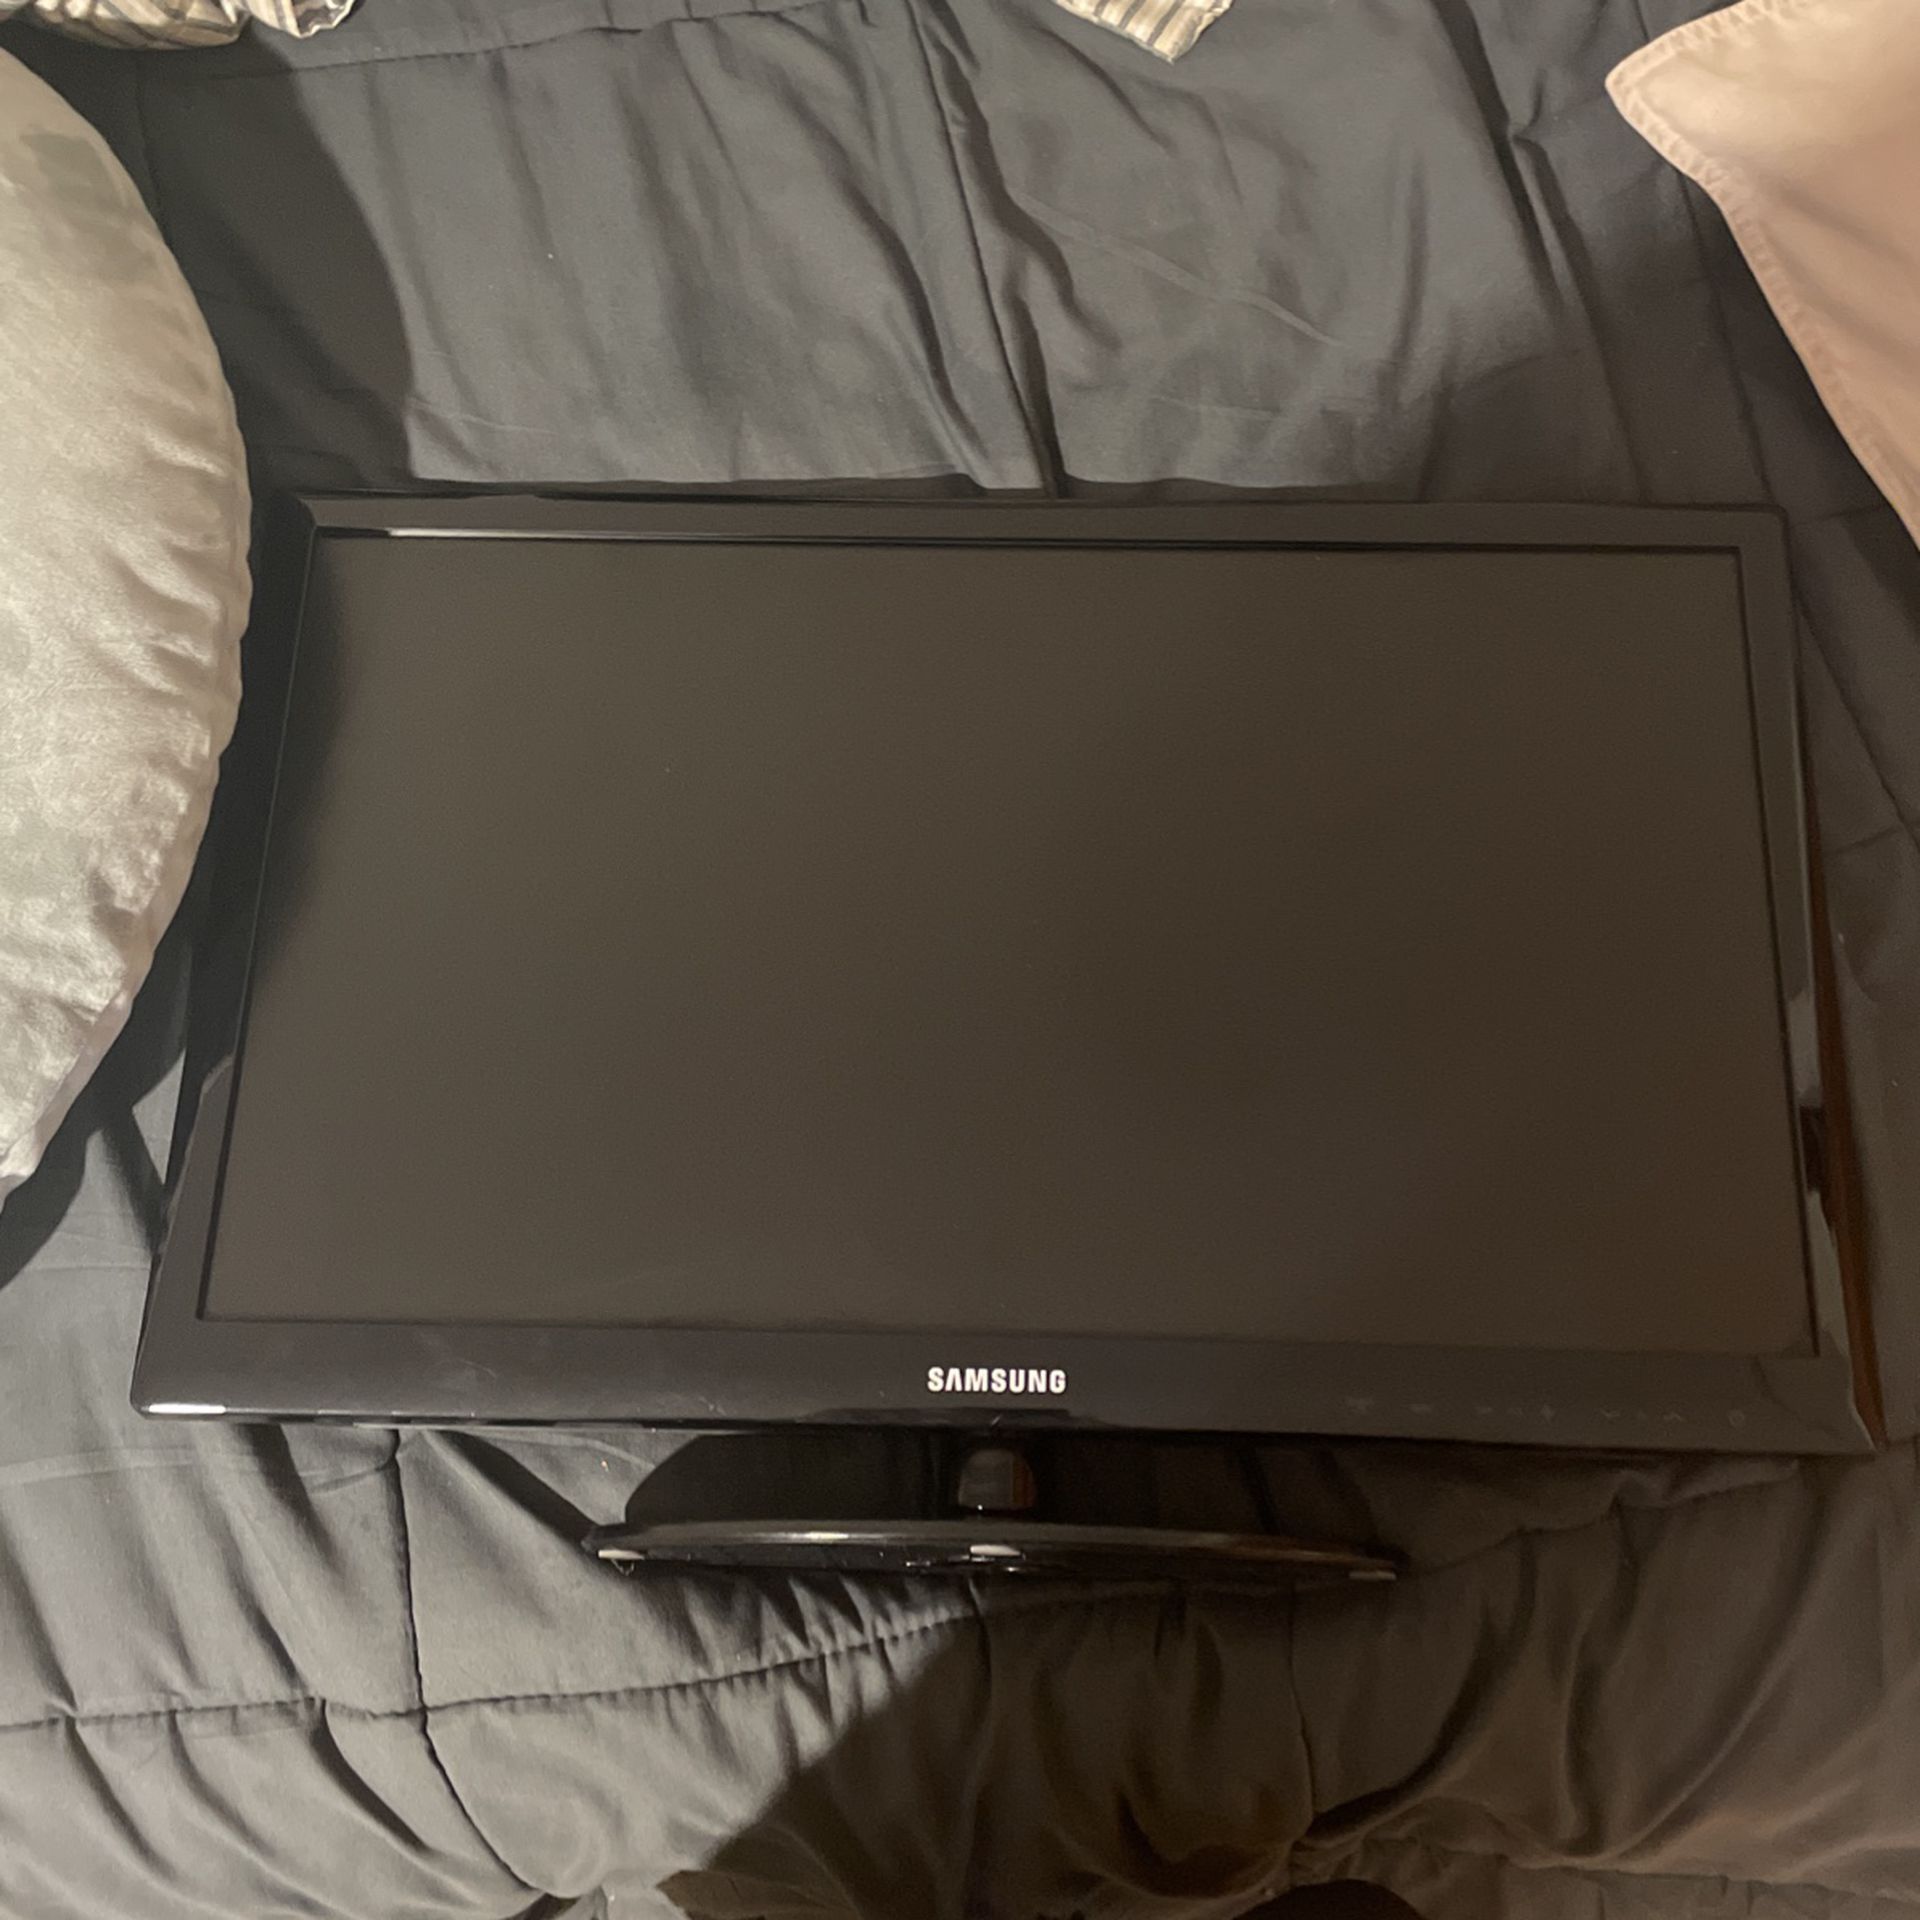 Samsung 20 Inch Monitor/TV WITH POWER CORD